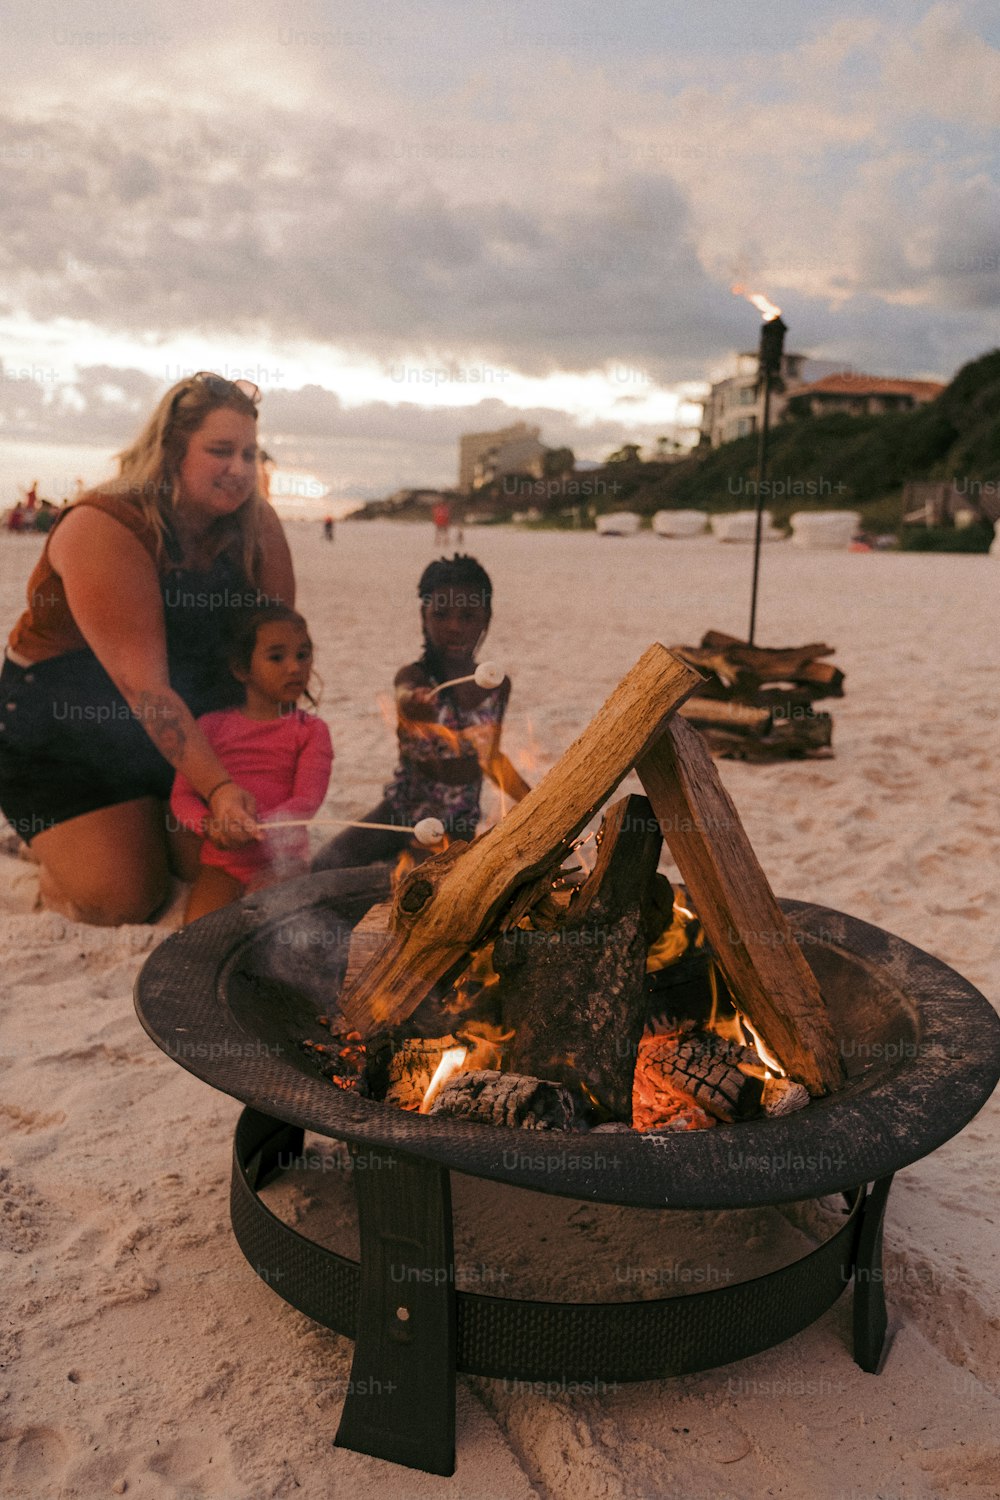 a woman kneeling down next to a fire pit on a beach